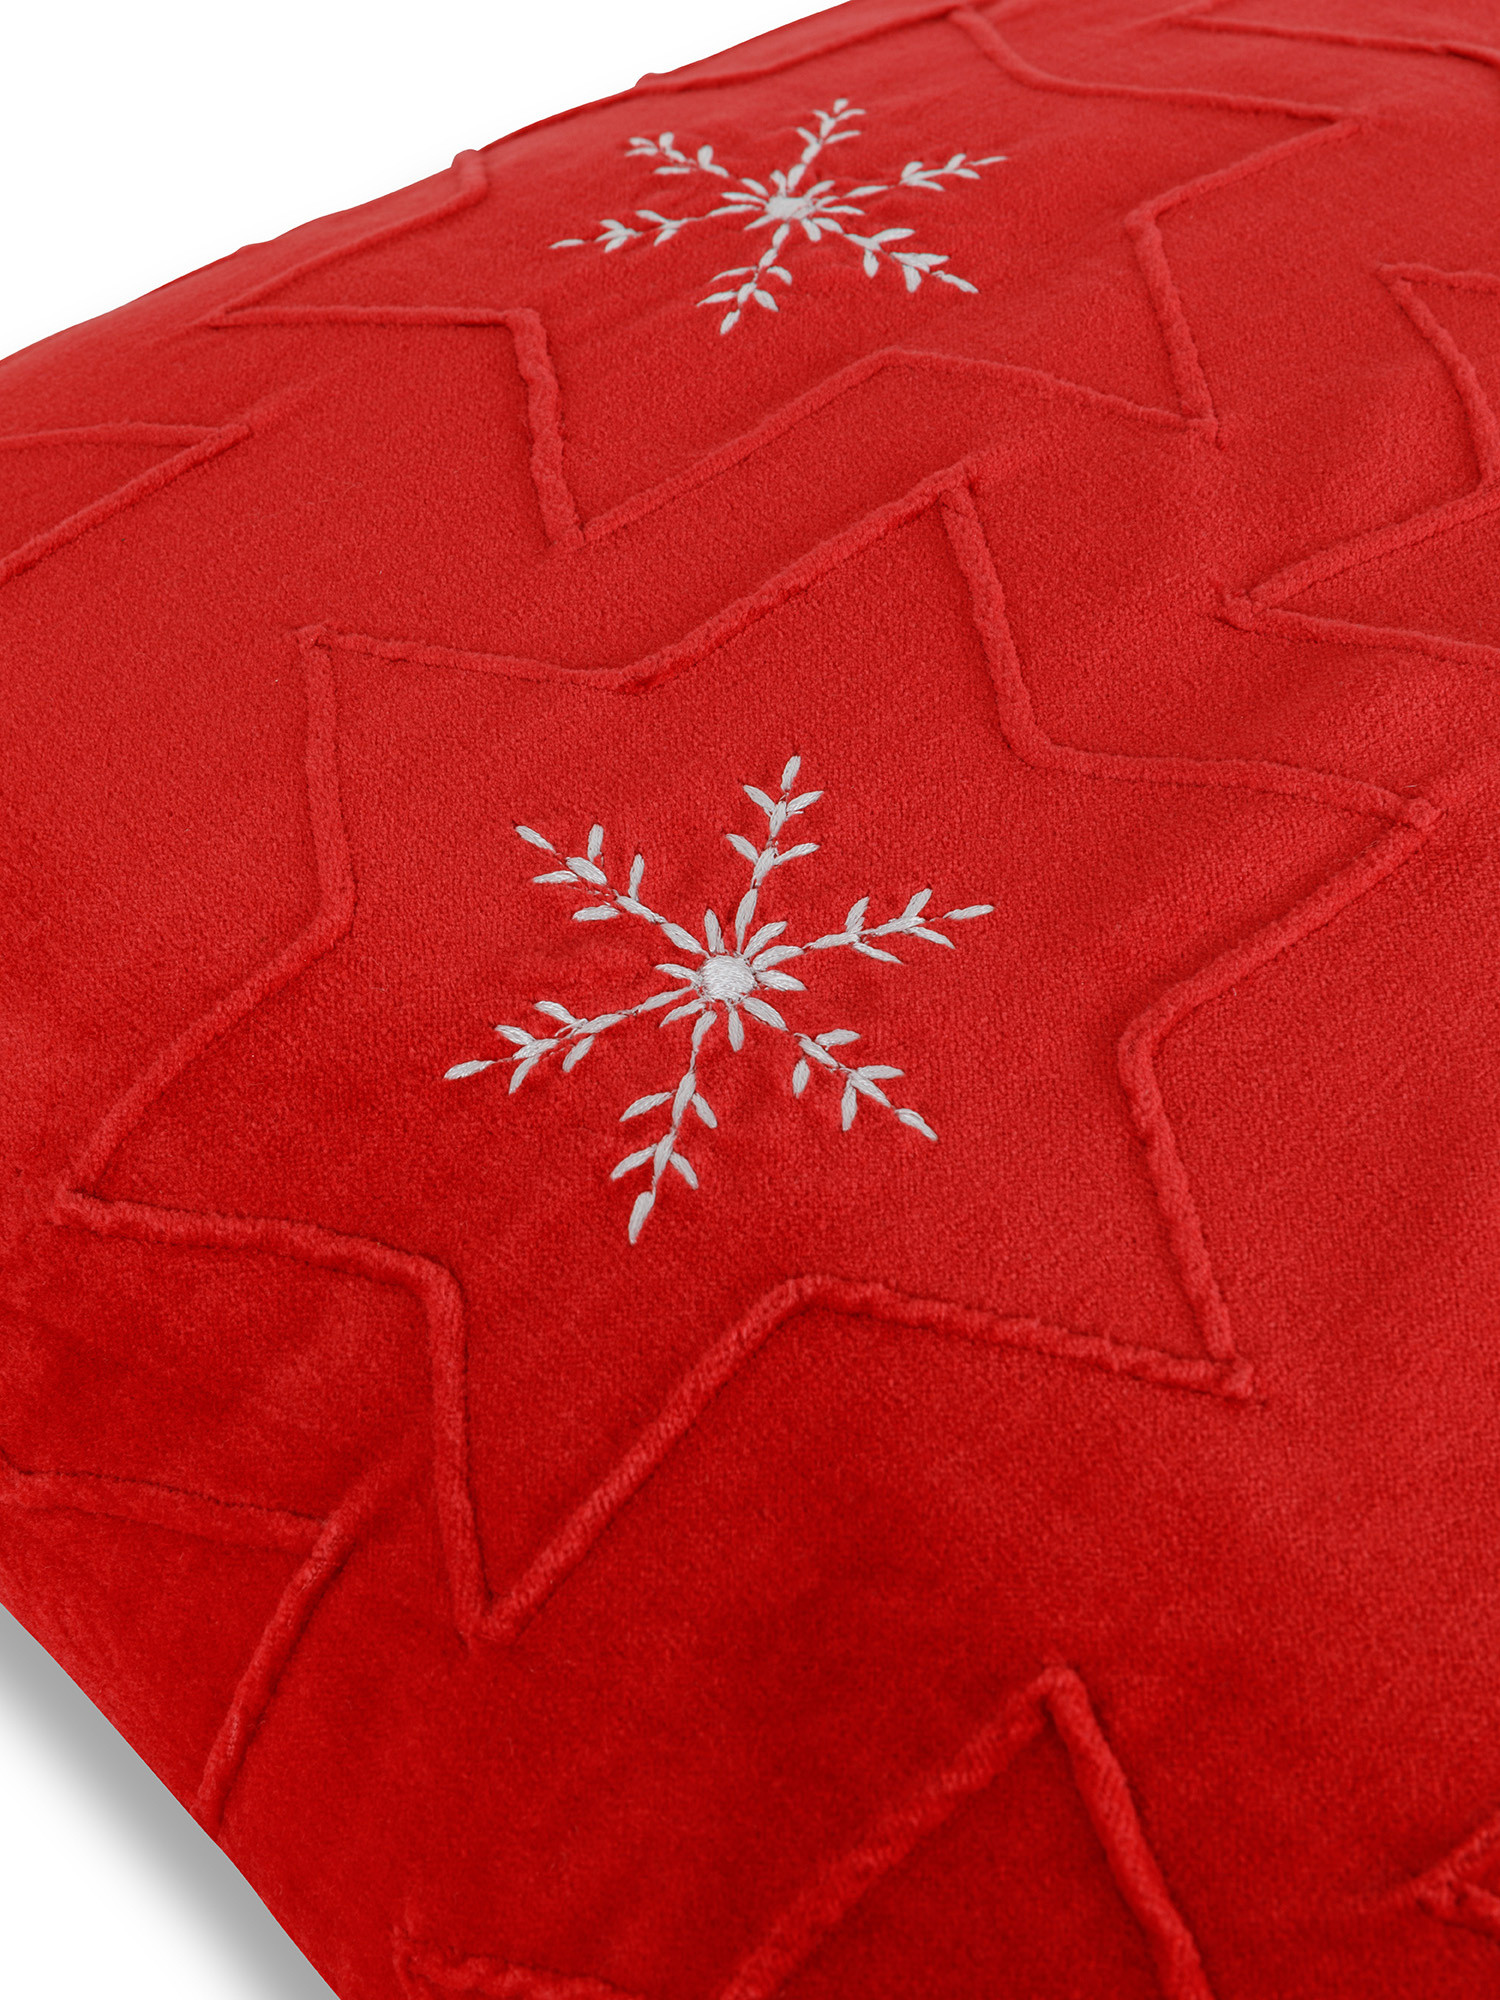 Velvet cushion with embossed stars 45x45 cm, Red, large image number 2